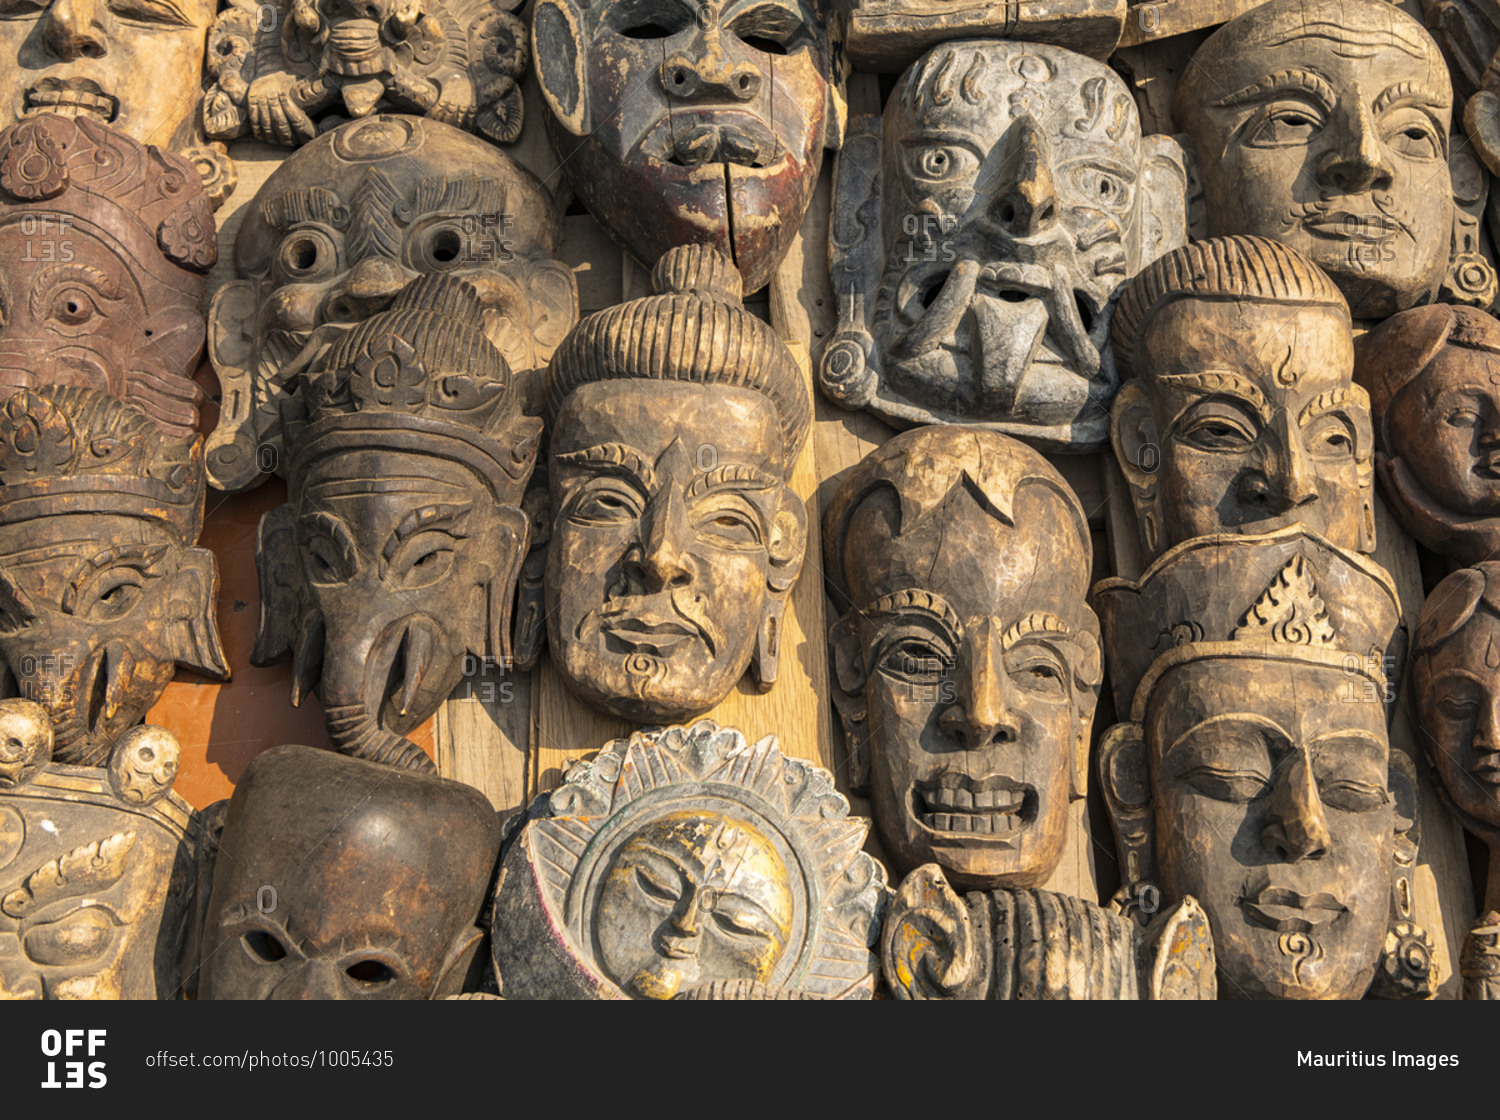 Souvenir shop with typical wooden masks in Kathmandu in Nepal. The masks are traditionally worn at the Mani Rimdu festival to drive out demons and reward believers.